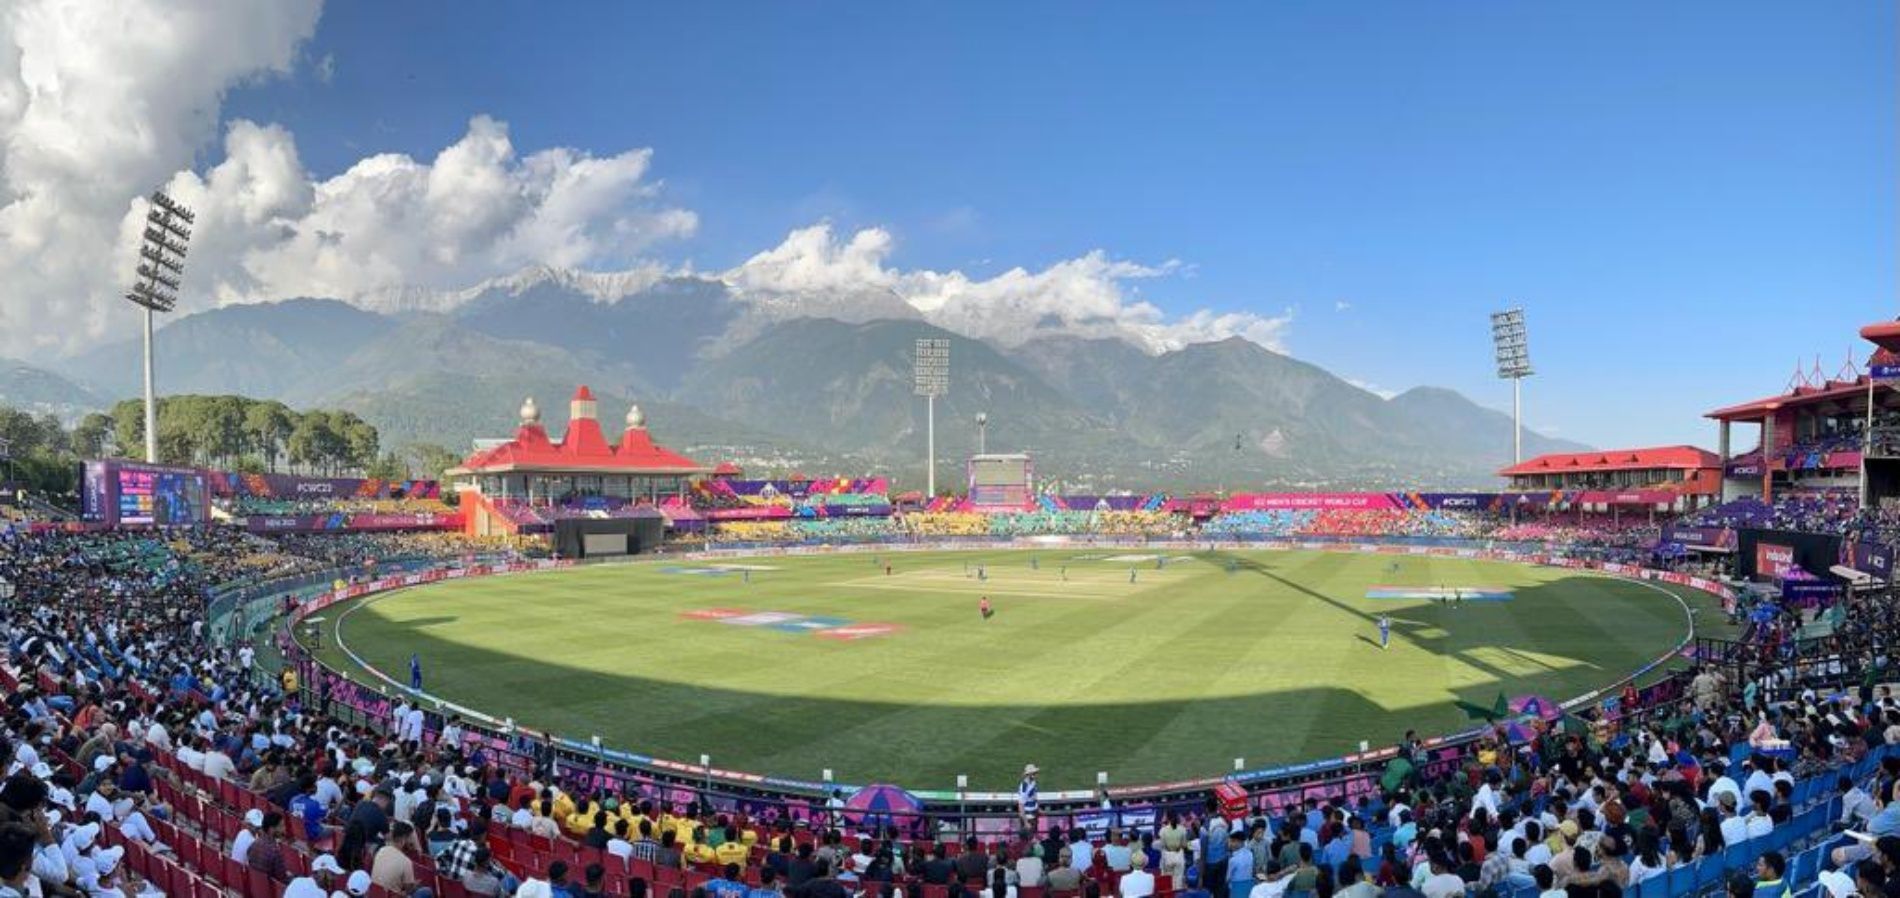 A view of the scenic stadium in Dharamsala (Pic: X)